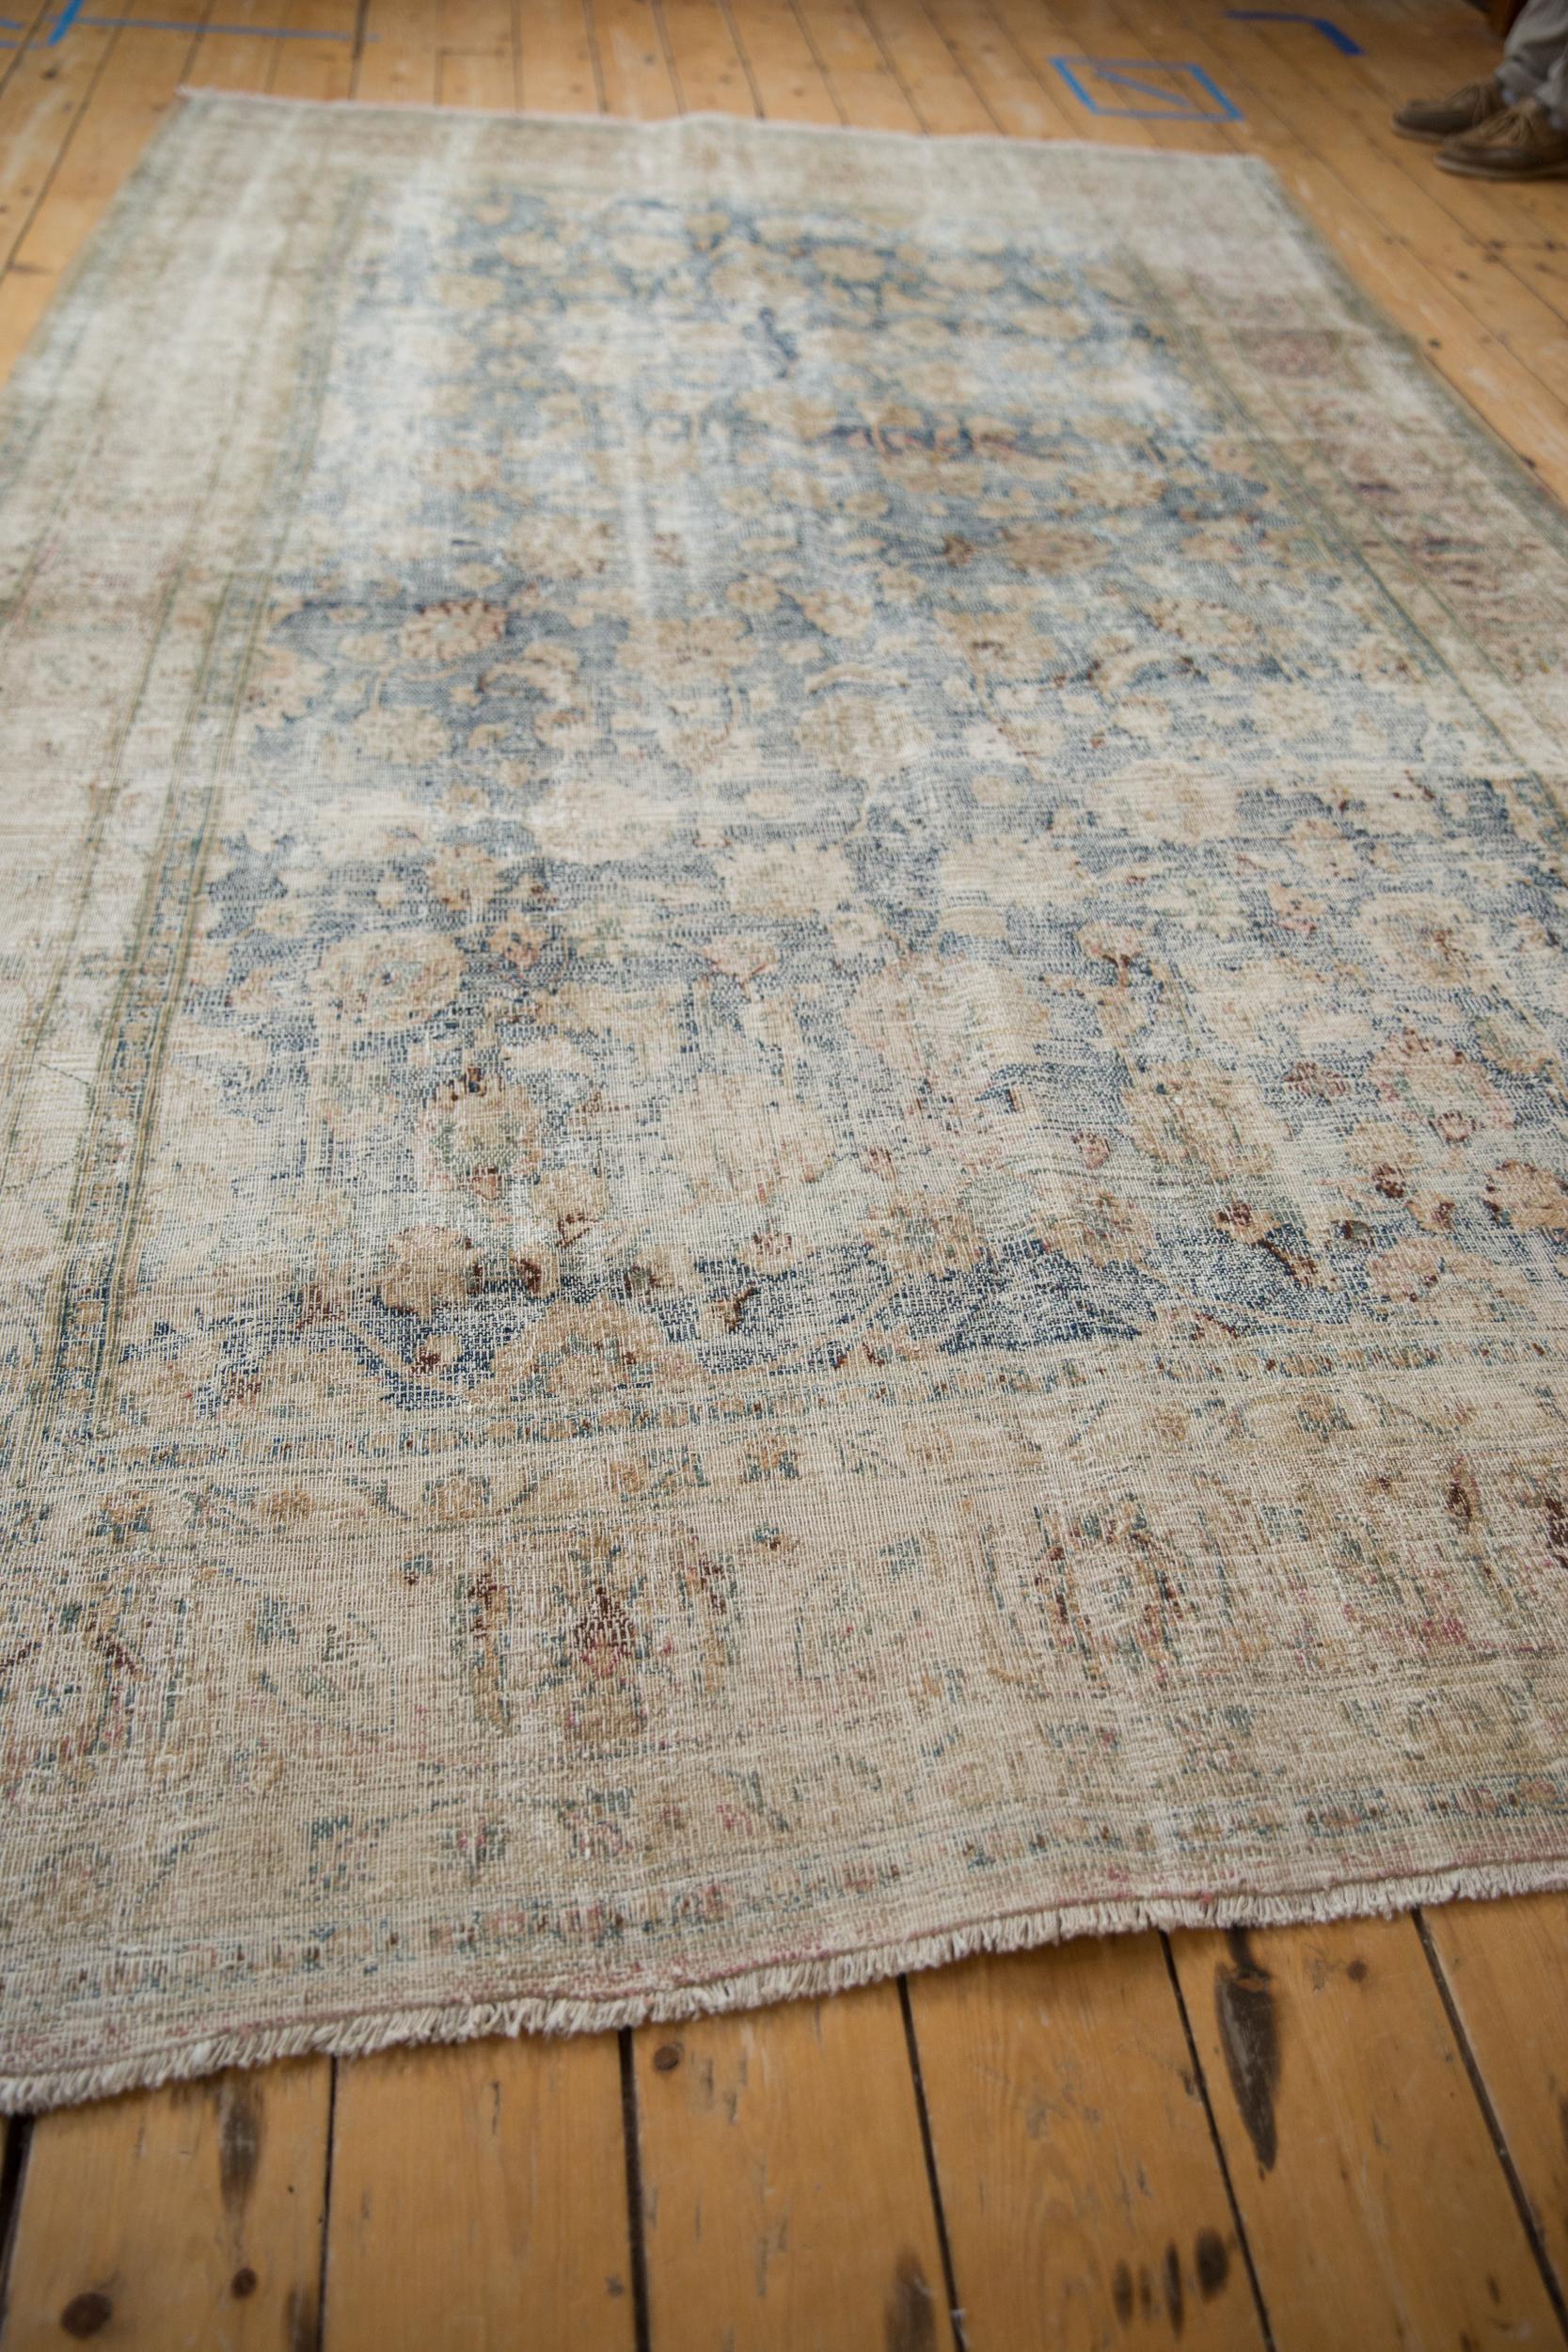 6,5x10,5 Vintage Distressed Meshed Teppich im Used-Look im Zustand „Relativ gut“ im Angebot in Katonah, NY